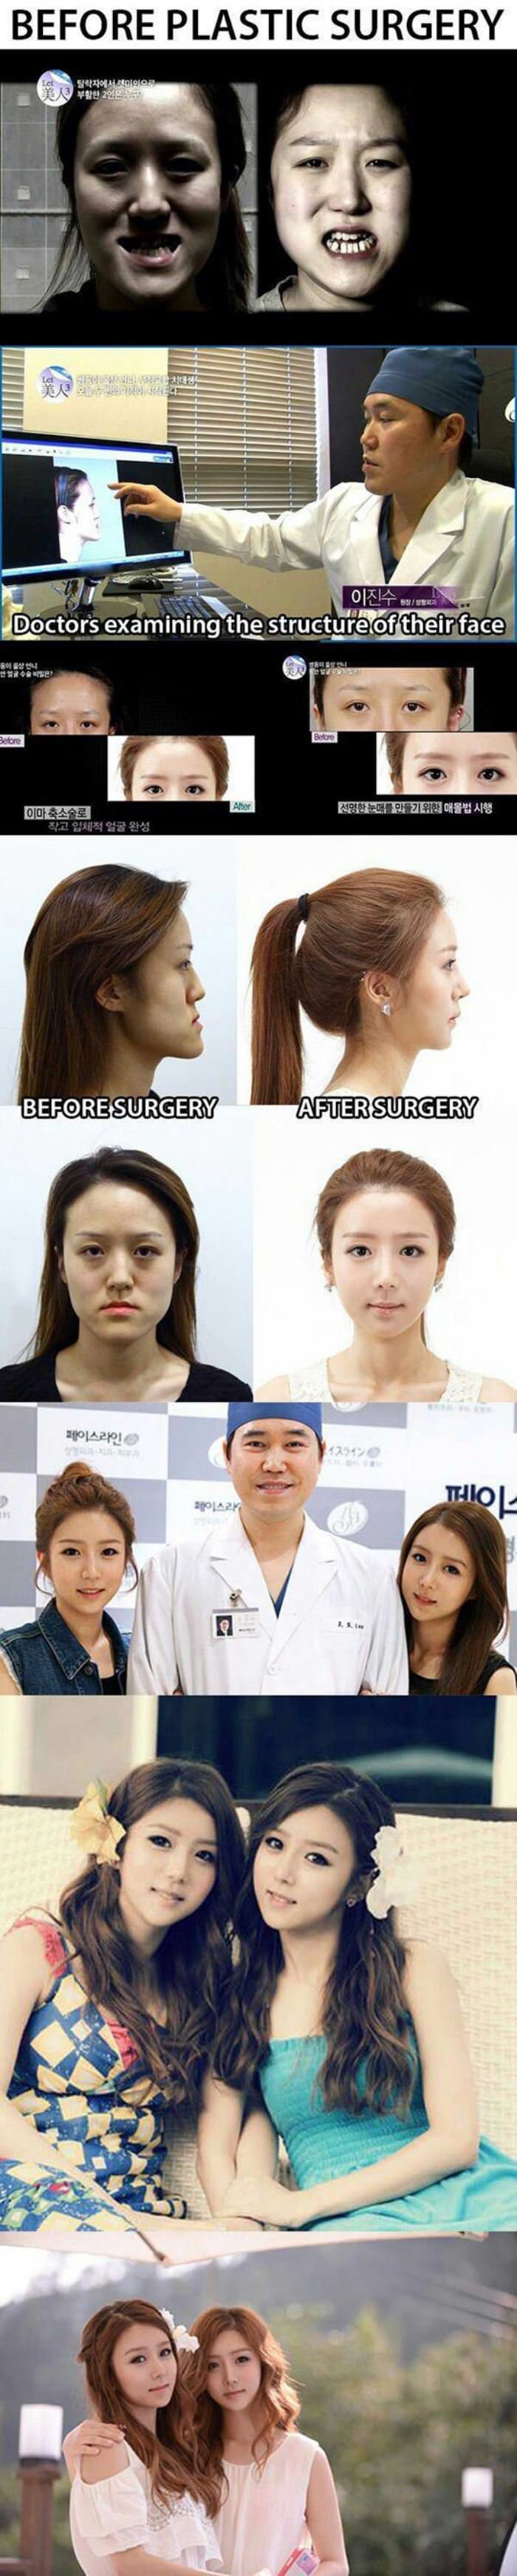 some plastic surgery funny picture